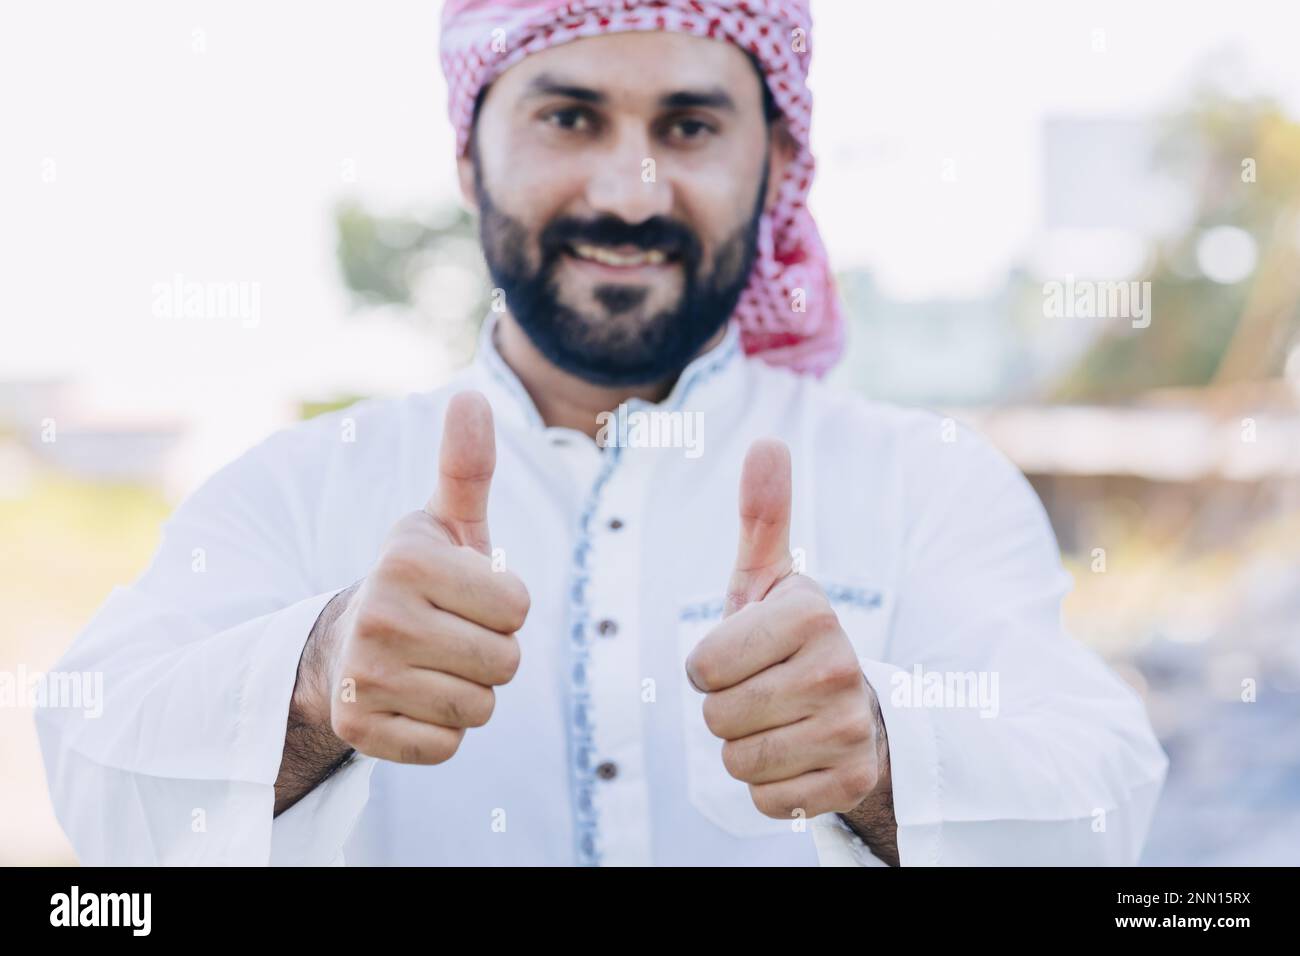 arub muslim adult male happy smiling thumbs up looking closeup Stock Photo